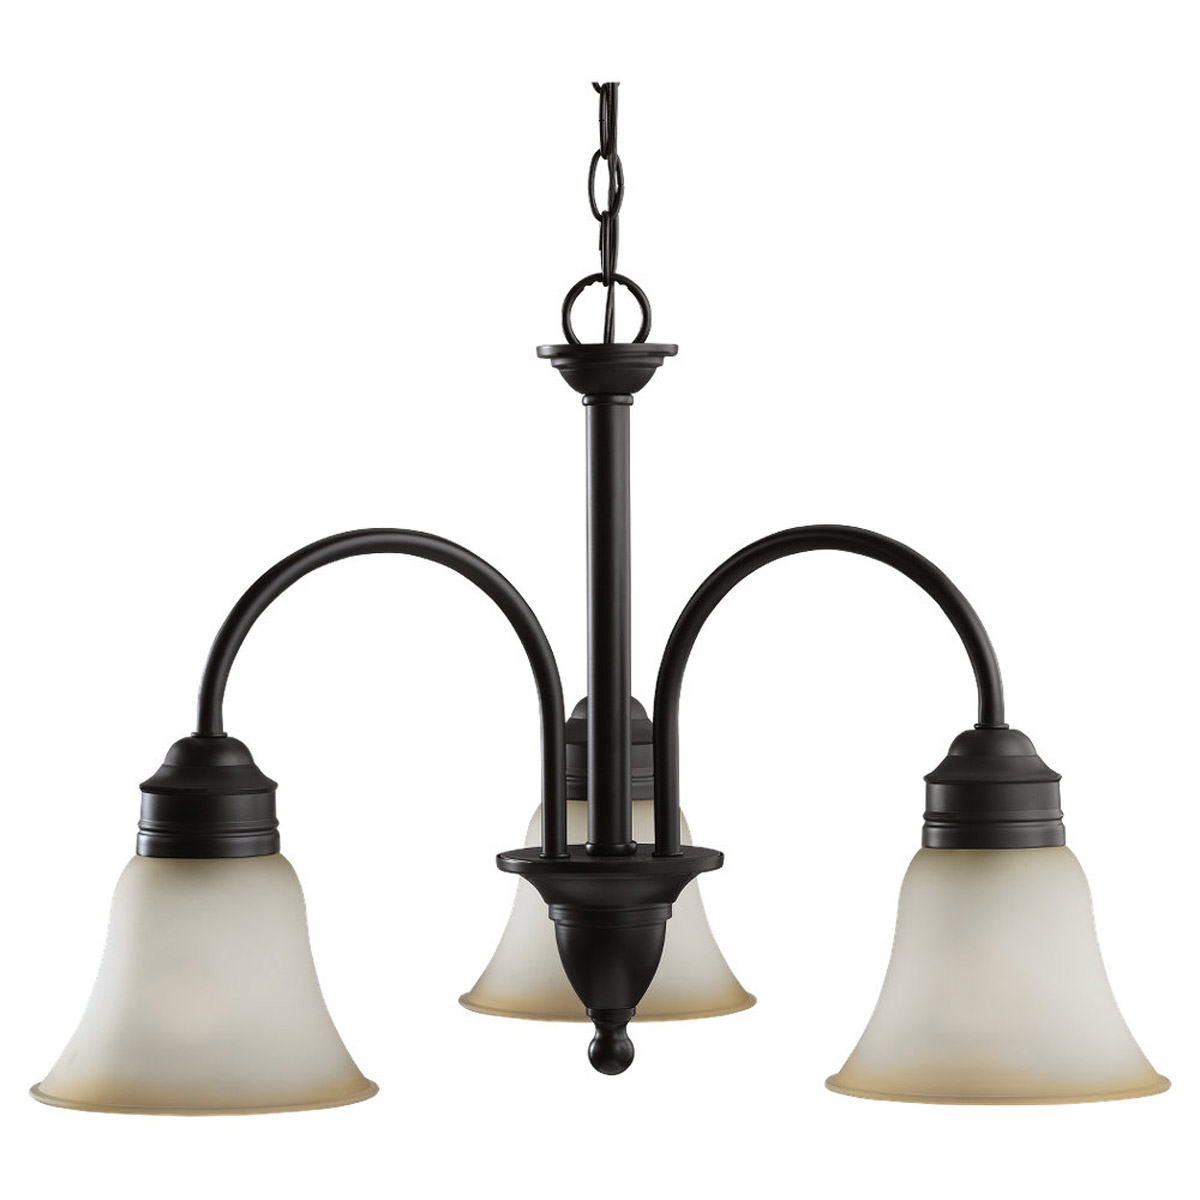 Sea Gull Lighting Gladstone 3 Light Chandelier in Forged Iron 31850-185